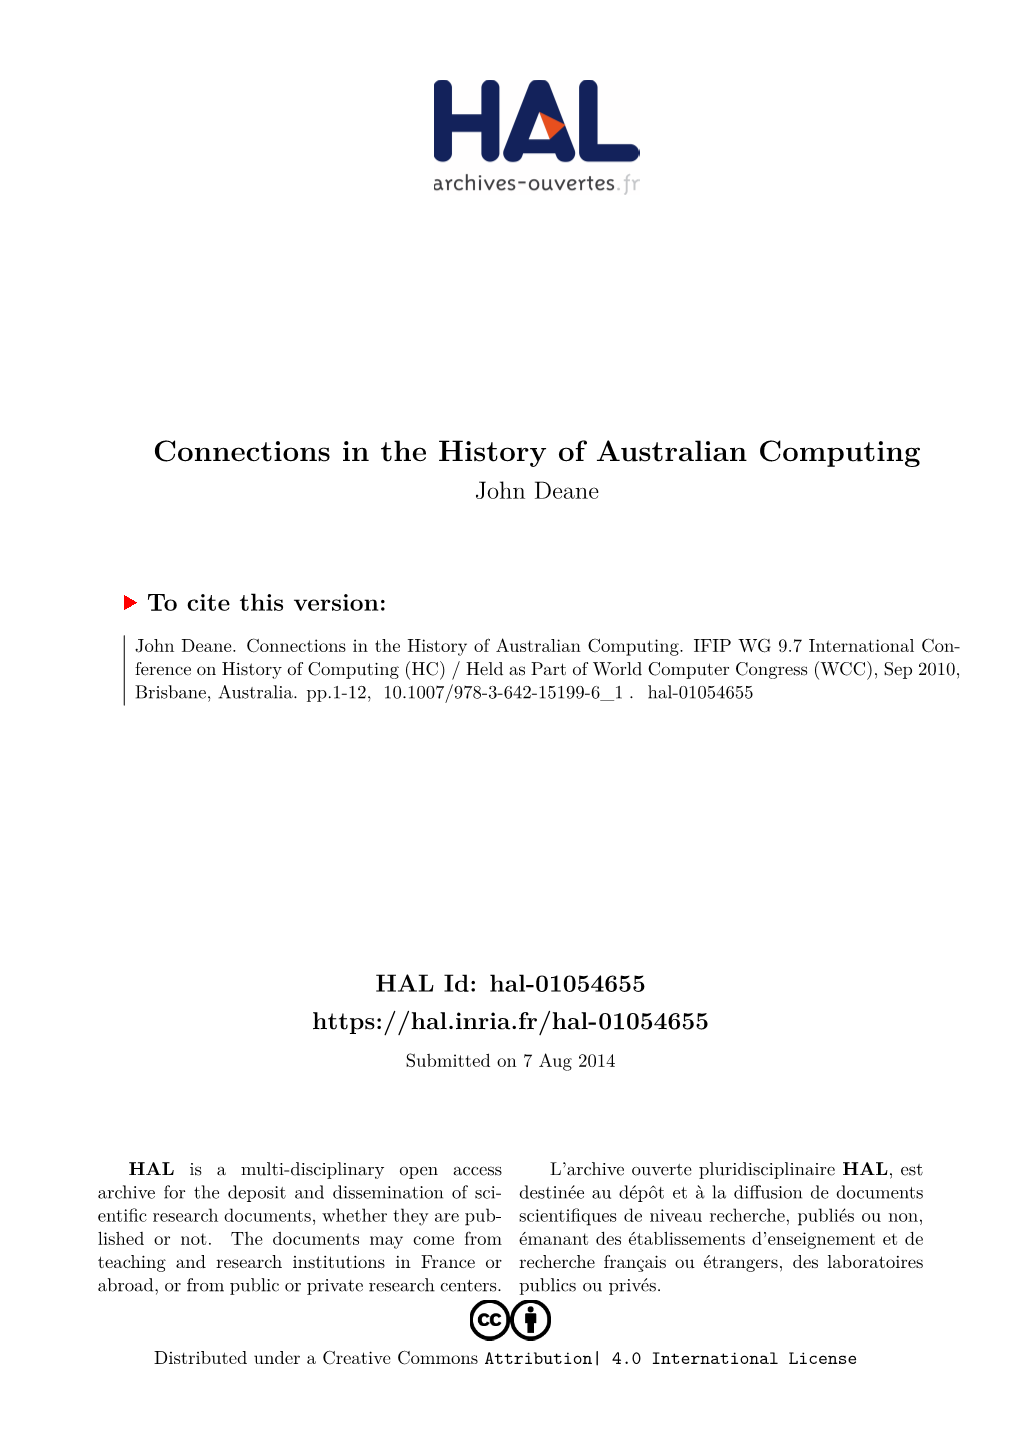 Connections in the History of Australian Computing John Deane